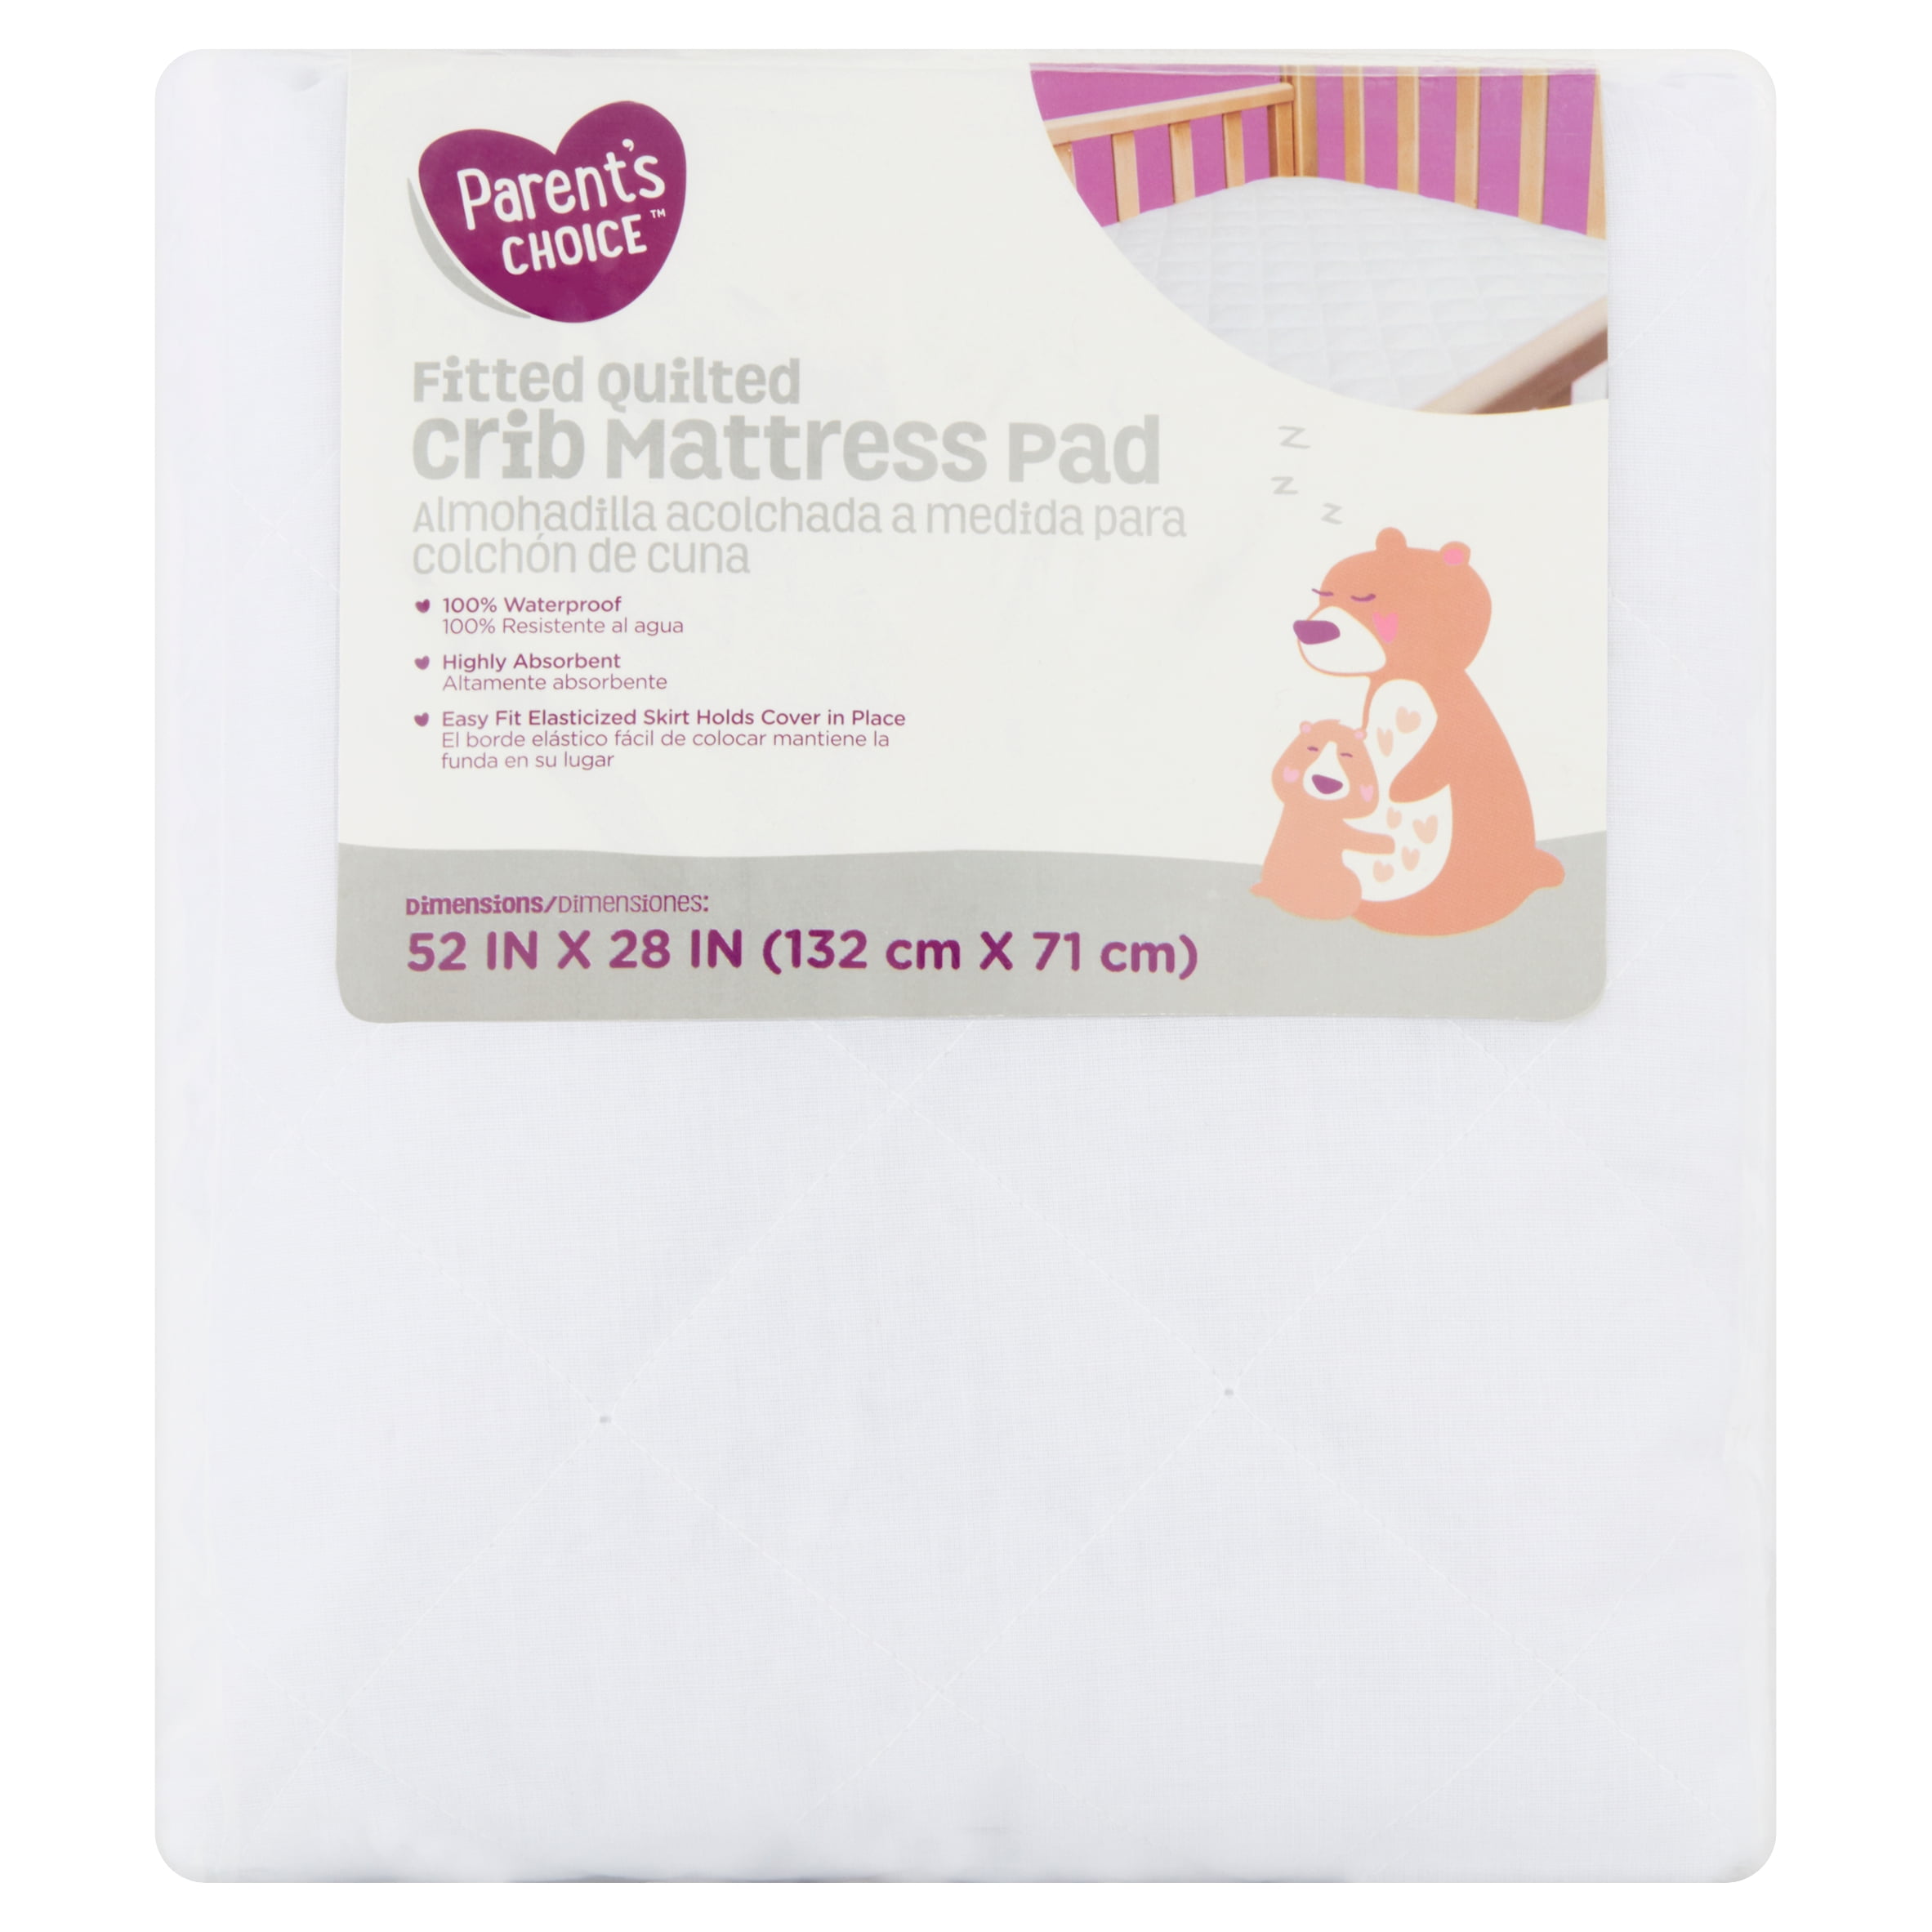 carter's keep me dry fitted quilted crib pad